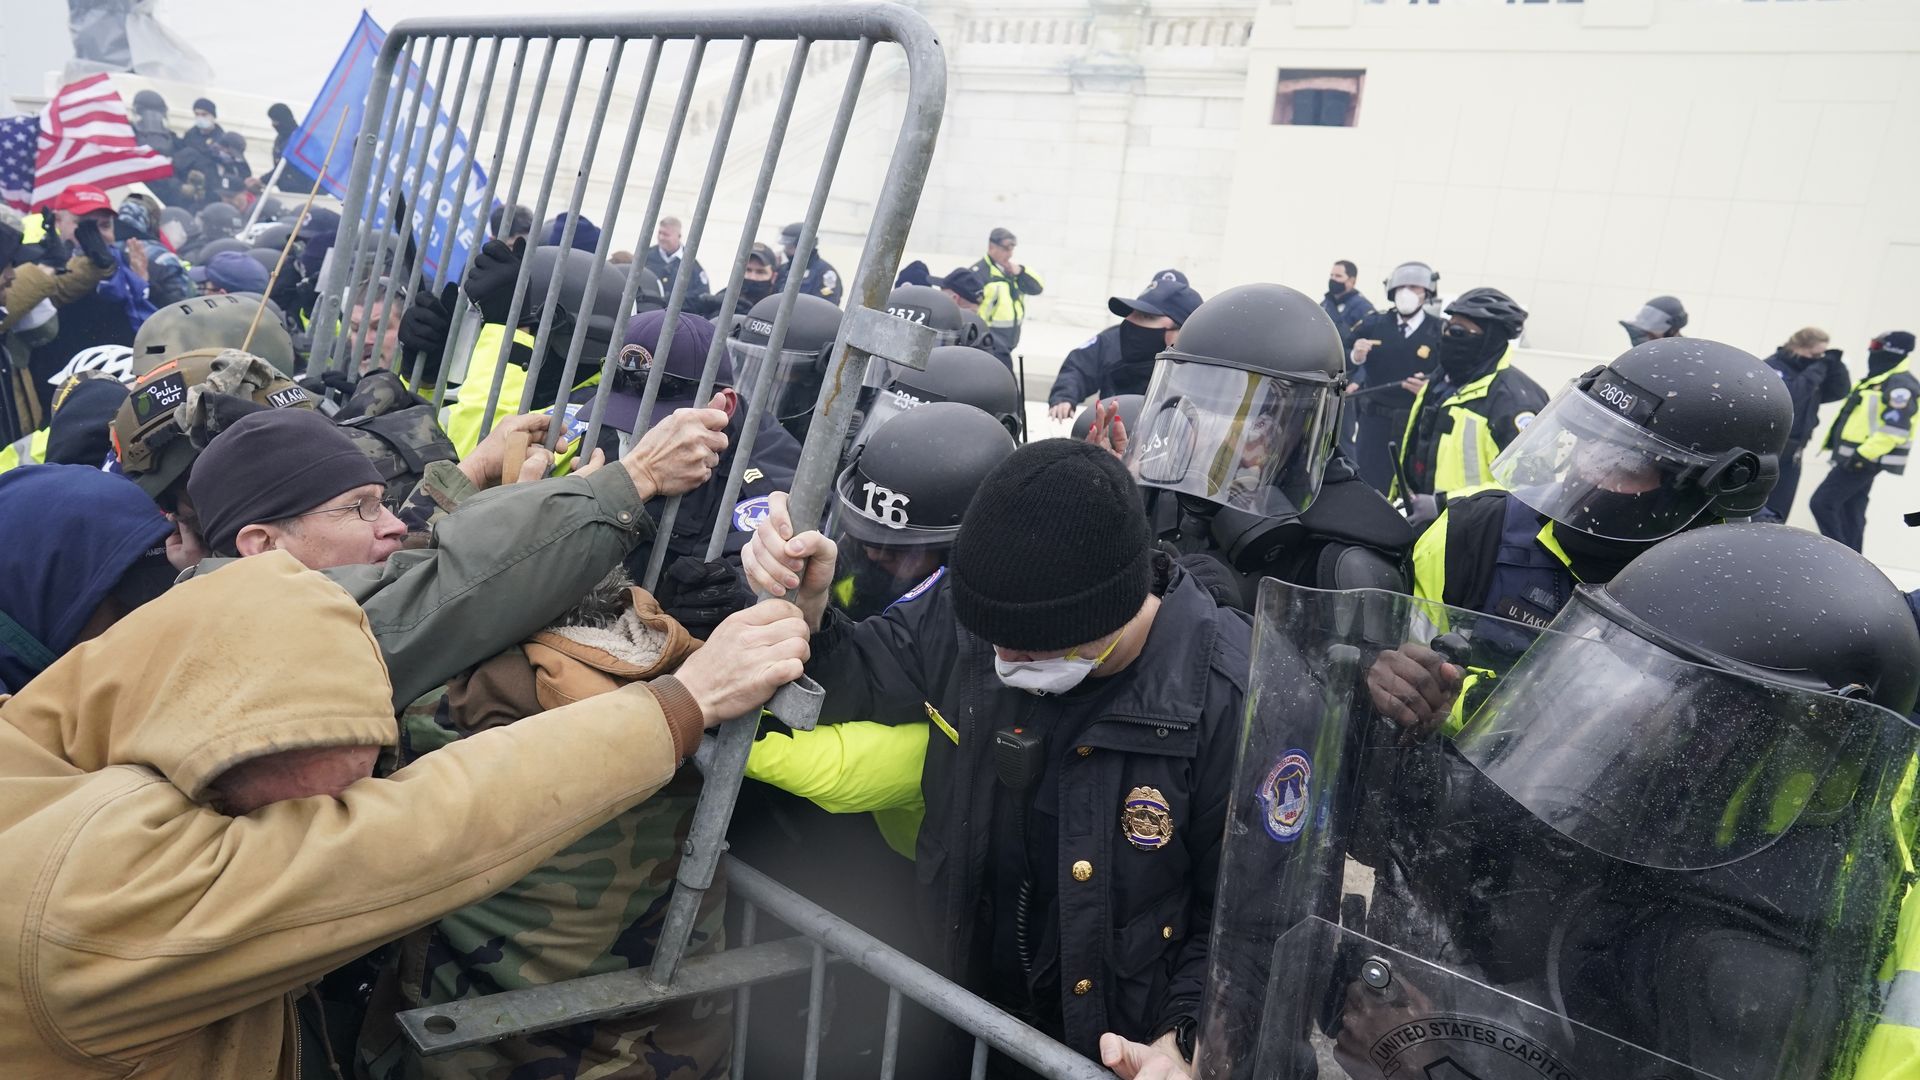  Police try to hold back protesters who gather storm the Capitol and halt a joint session of the 117th Congress on Wednesday, Jan. 6, 2021 in Washington, DC. 